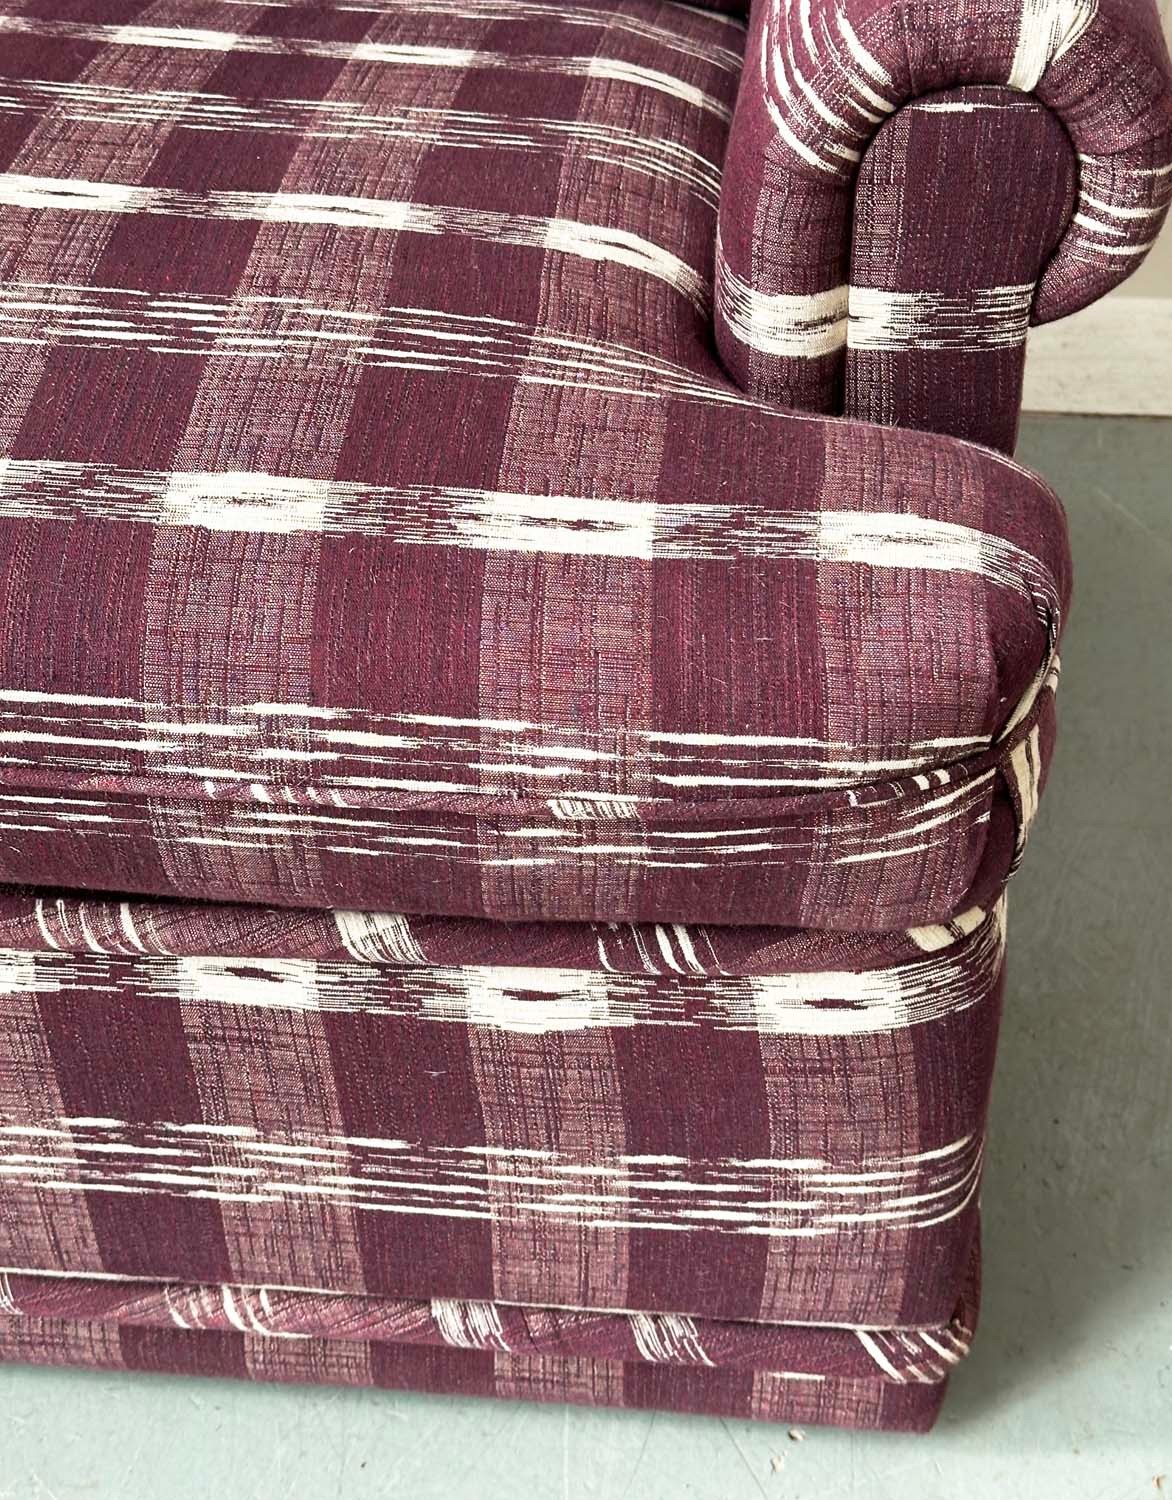 SOFA, Swedish check purple/white upholstery with scroll arms, 203cm W. - Image 3 of 9